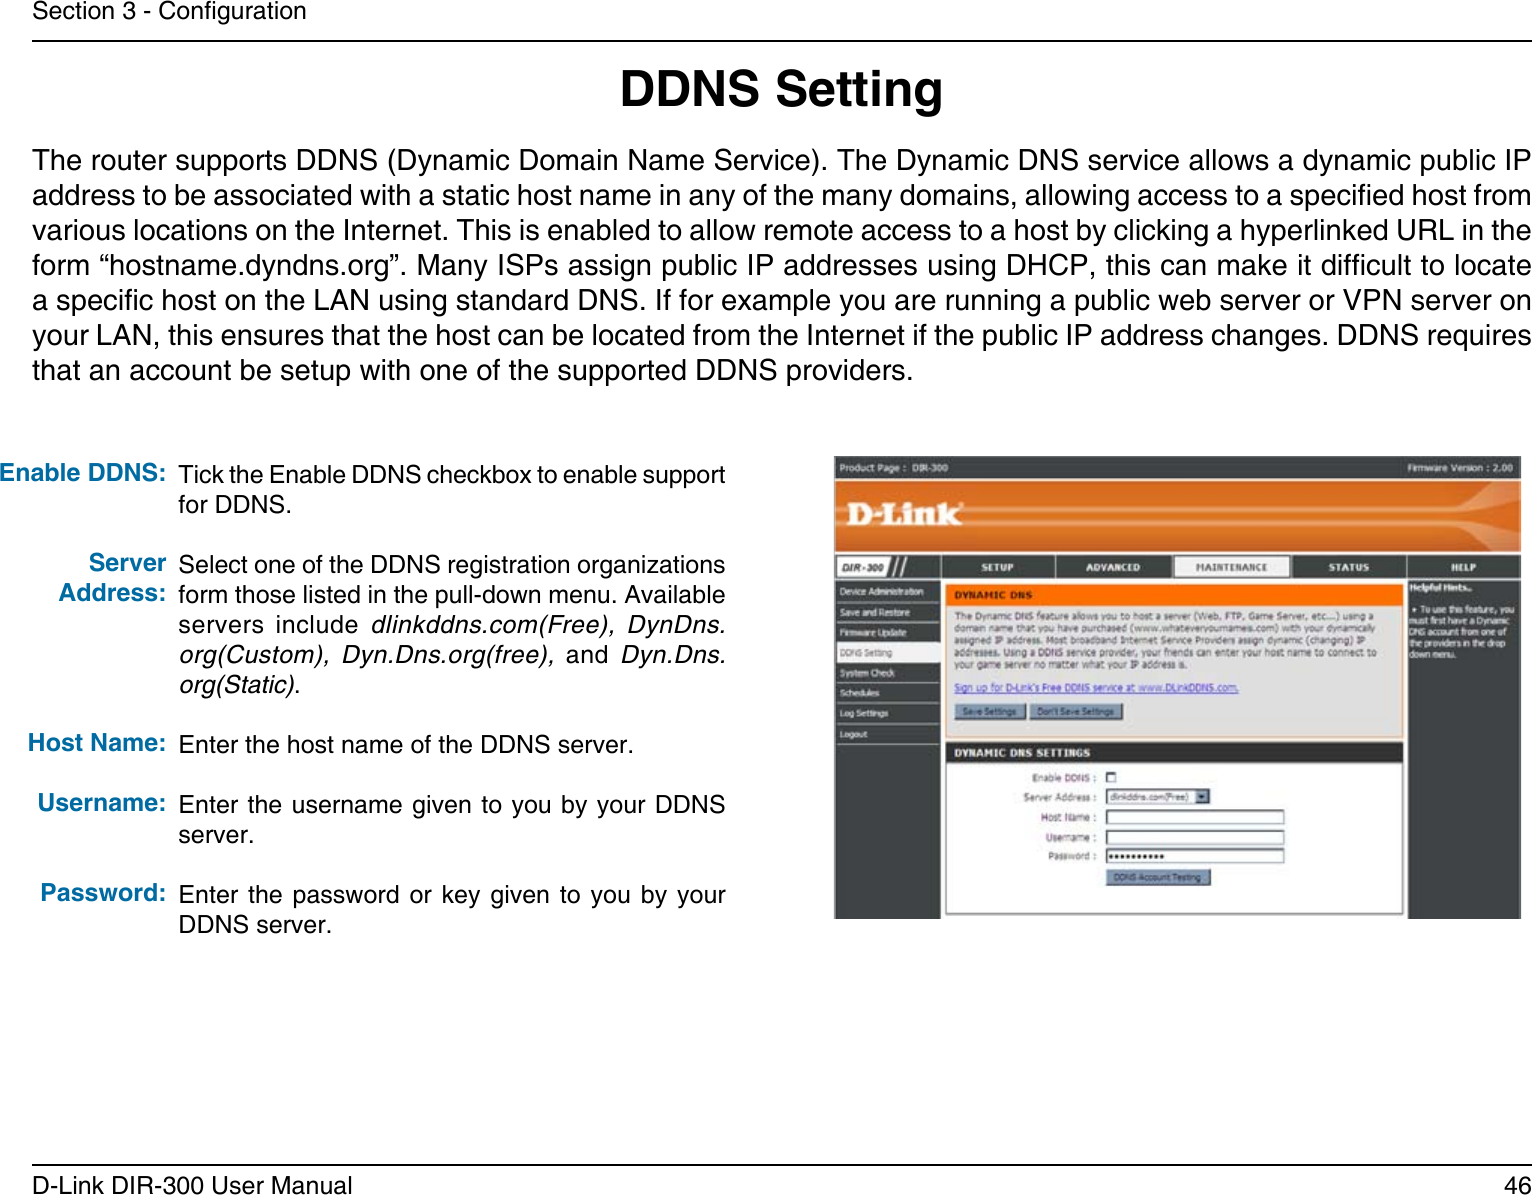 46D-Link DIR-300 User ManualSection 3 - CongurationDDNS SettingTick the Enable DDNS checkbox to enable support for DDNS.Select one of the DDNS registration organizations form those listed in the pull-down menu. Available servers  include  dlinkddns.com(Free),  DynDns.org(Custom),  Dyn.Dns.org(free),  and  Dyn.Dns.org(Static).Enter the host name of the DDNS server.Enter the username given to you by your DDNS server.Enter the  password  or key given  to  you by your DDNS server.Enable DDNS:Server Address:Host Name:Username:Password:The router supports DDNS (Dynamic Domain Name Service). The Dynamic DNS service allows a dynamic public IP address to be associated with a static host name in any of the many domains, allowing access to a specied host from various locations on the Internet. This is enabled to allow remote access to a host by clicking a hyperlinked URL in the form “hostname.dyndns.org”. Many ISPs assign public IP addresses using DHCP, this can make it difcult to locate a specic host on the LAN using standard DNS. If for example you are running a public web server or VPN server on your LAN, this ensures that the host can be located from the Internet if the public IP address changes. DDNS requires that an account be setup with one of the supported DDNS providers.